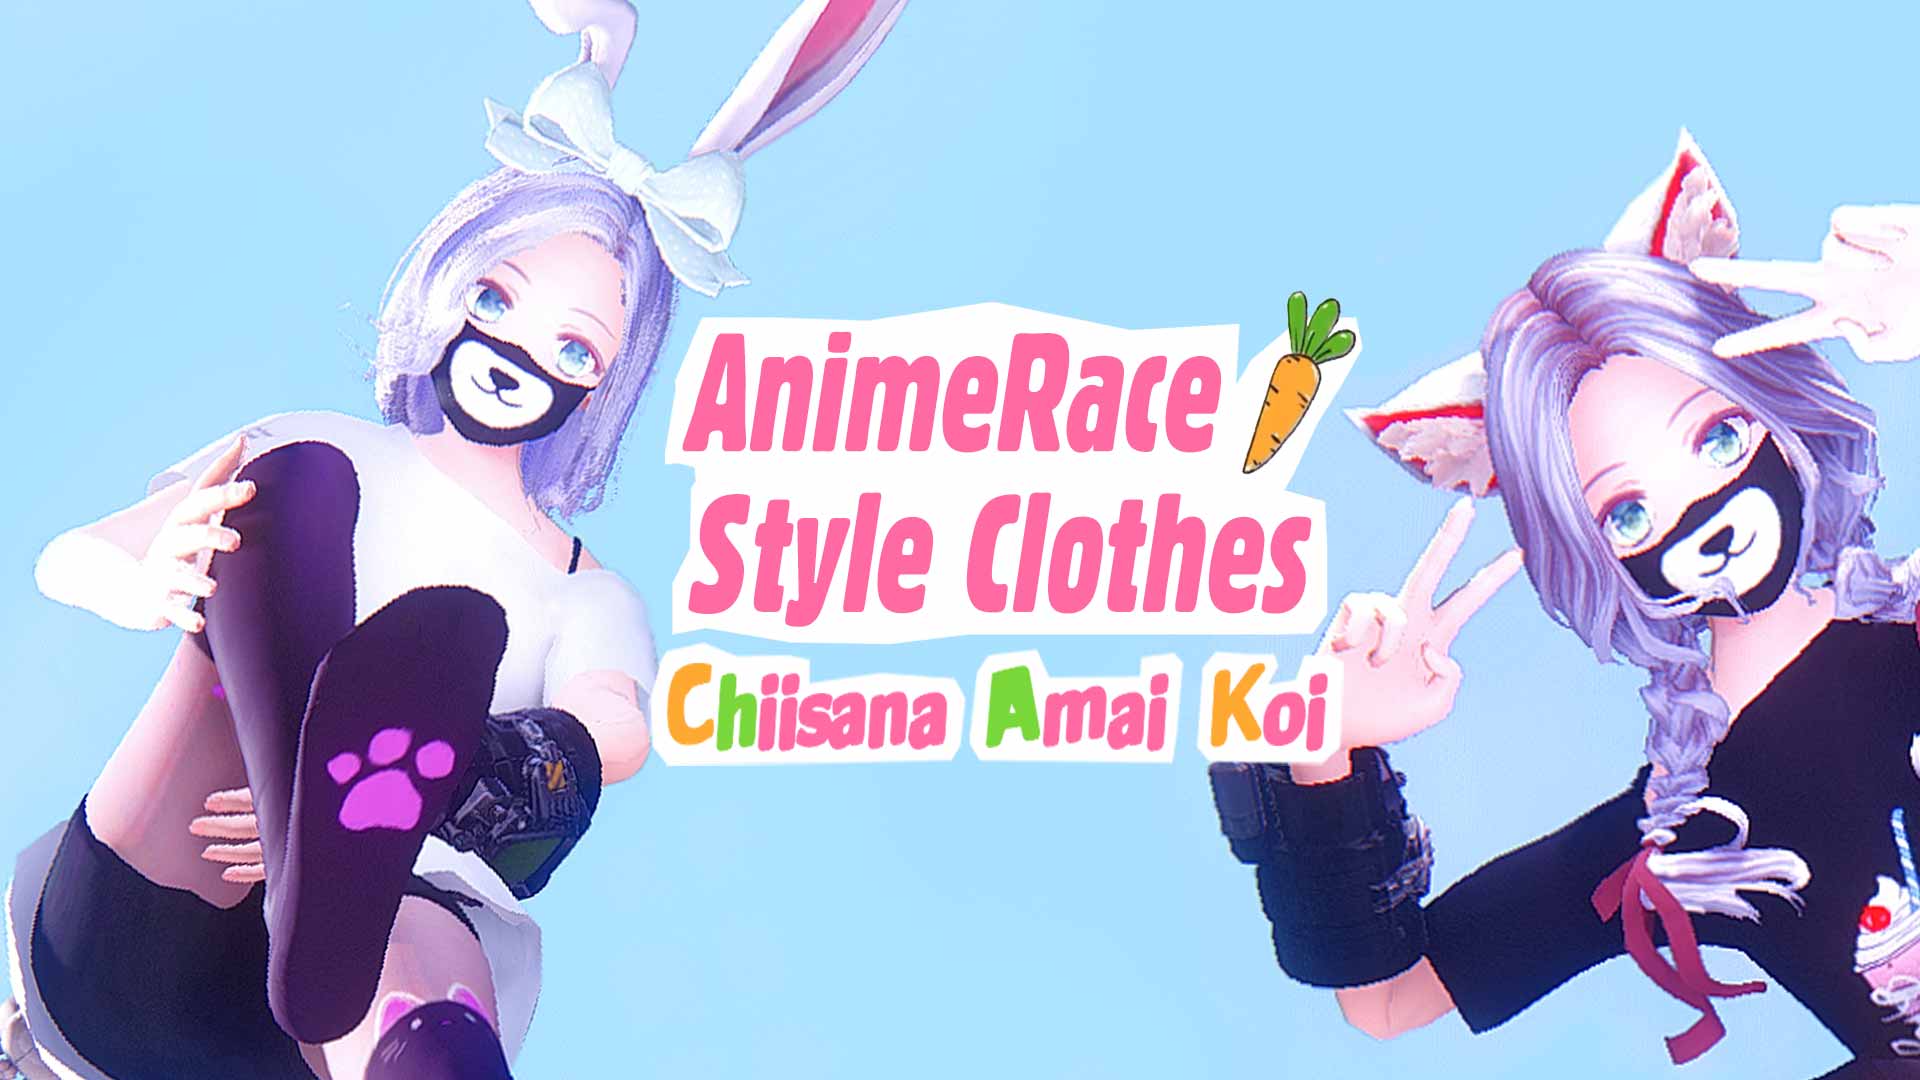 I'd Wear These Anime-Inspired Clothes